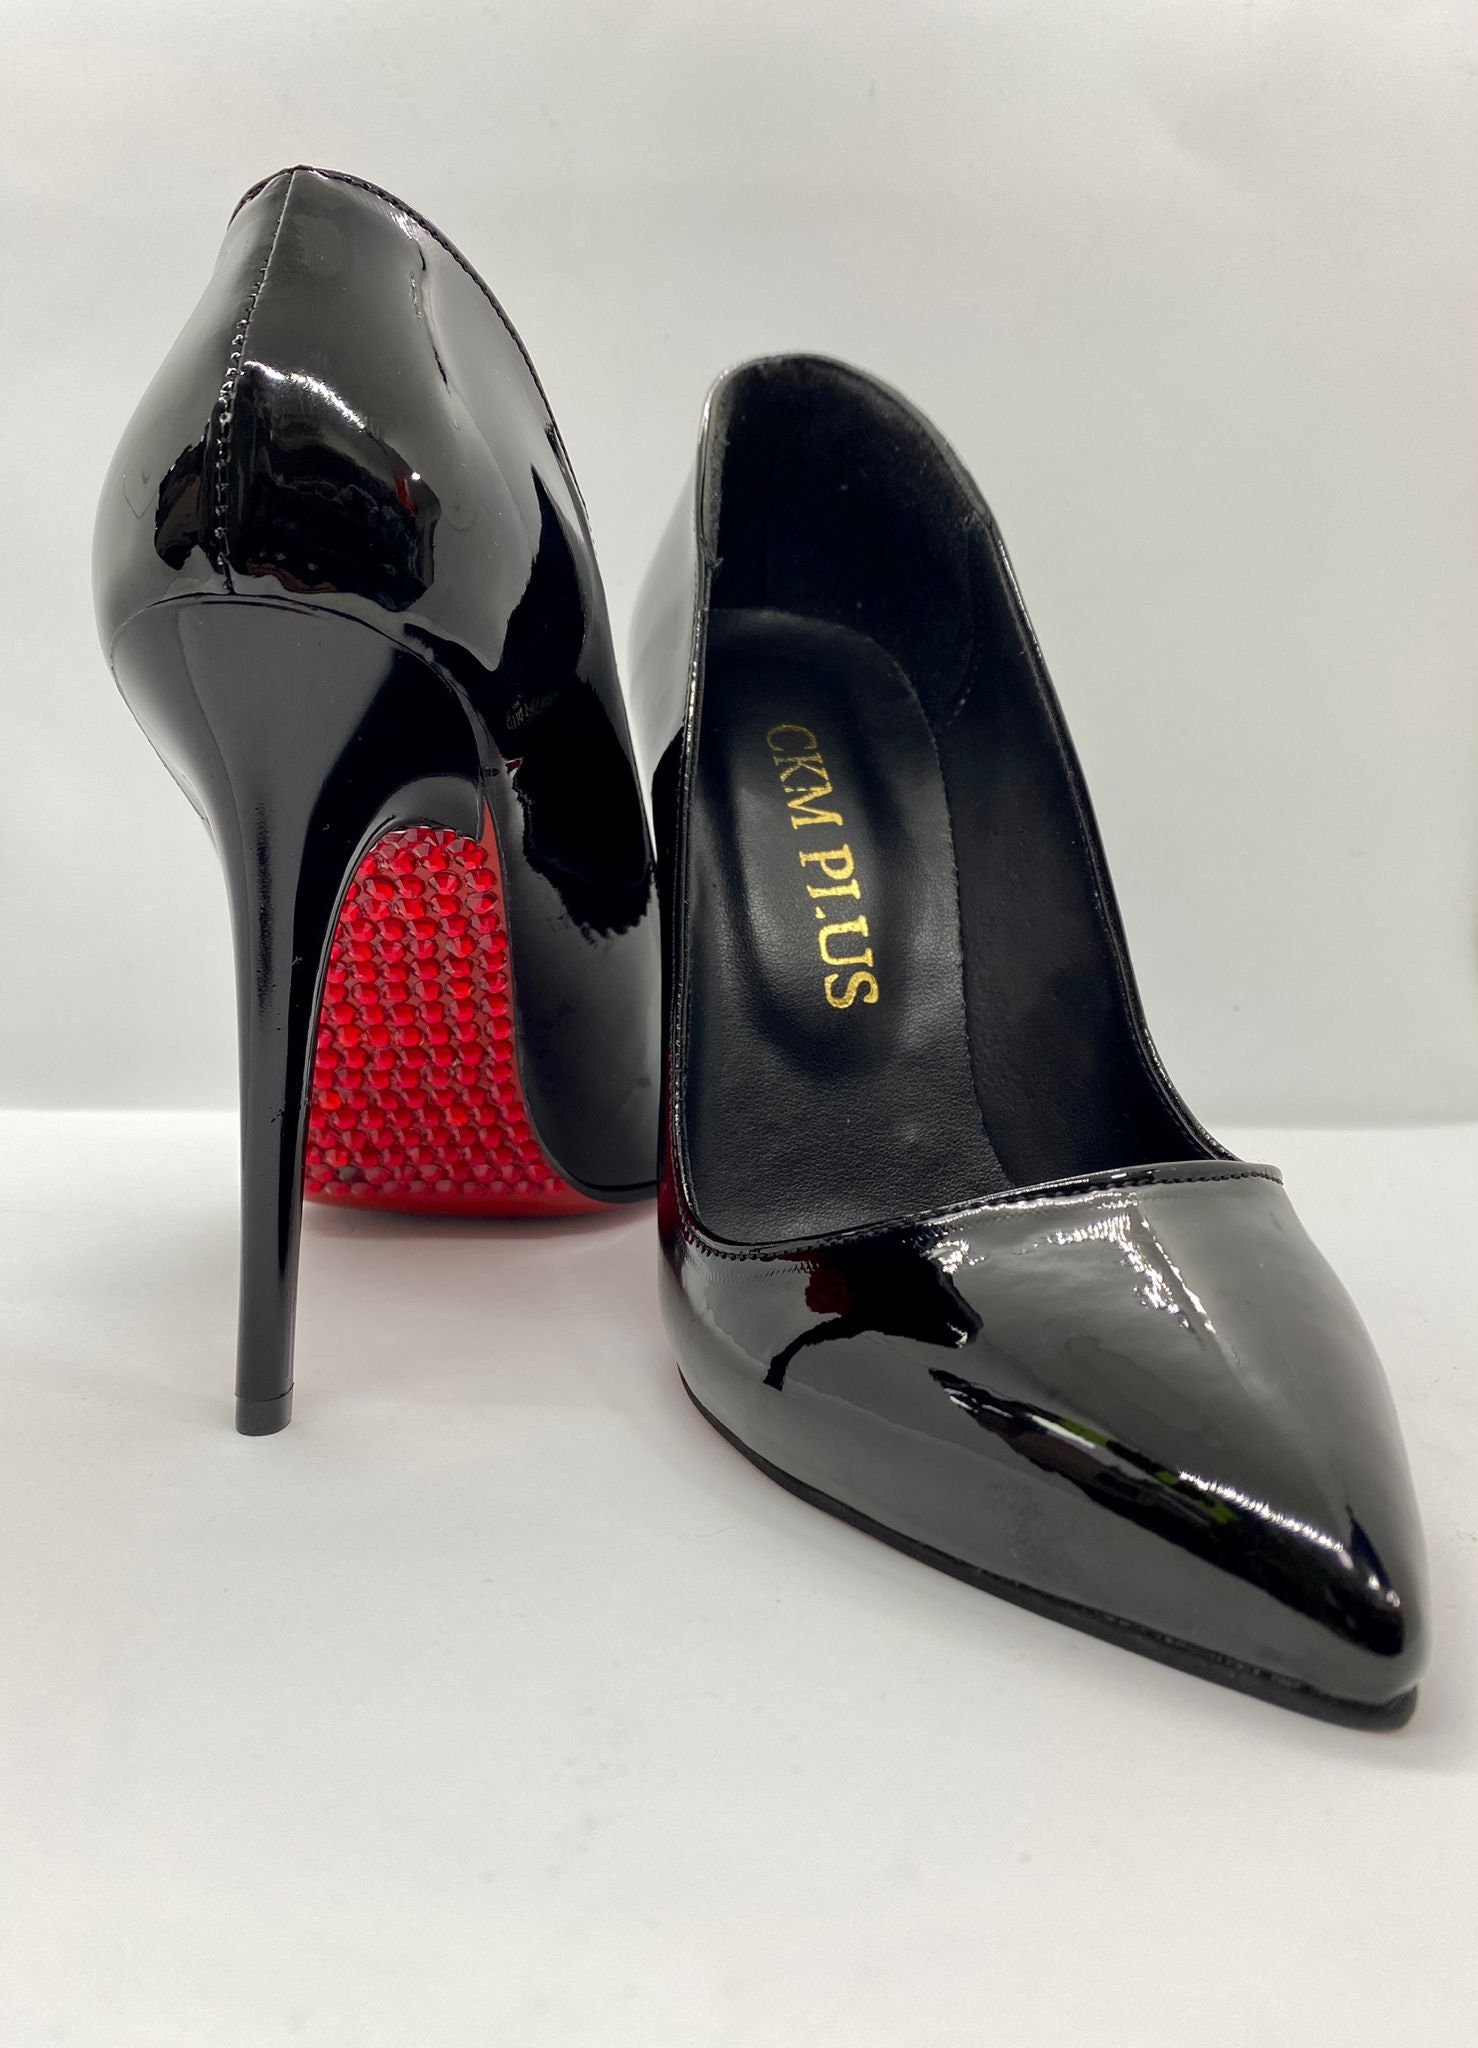 Crystal Red Bottoms, Stiletto Pumps | Formal, Party, Prom, Y2K, US Size 7,  Last Pair |Black Vegan Patent Red Bottoms | Free US Shipping